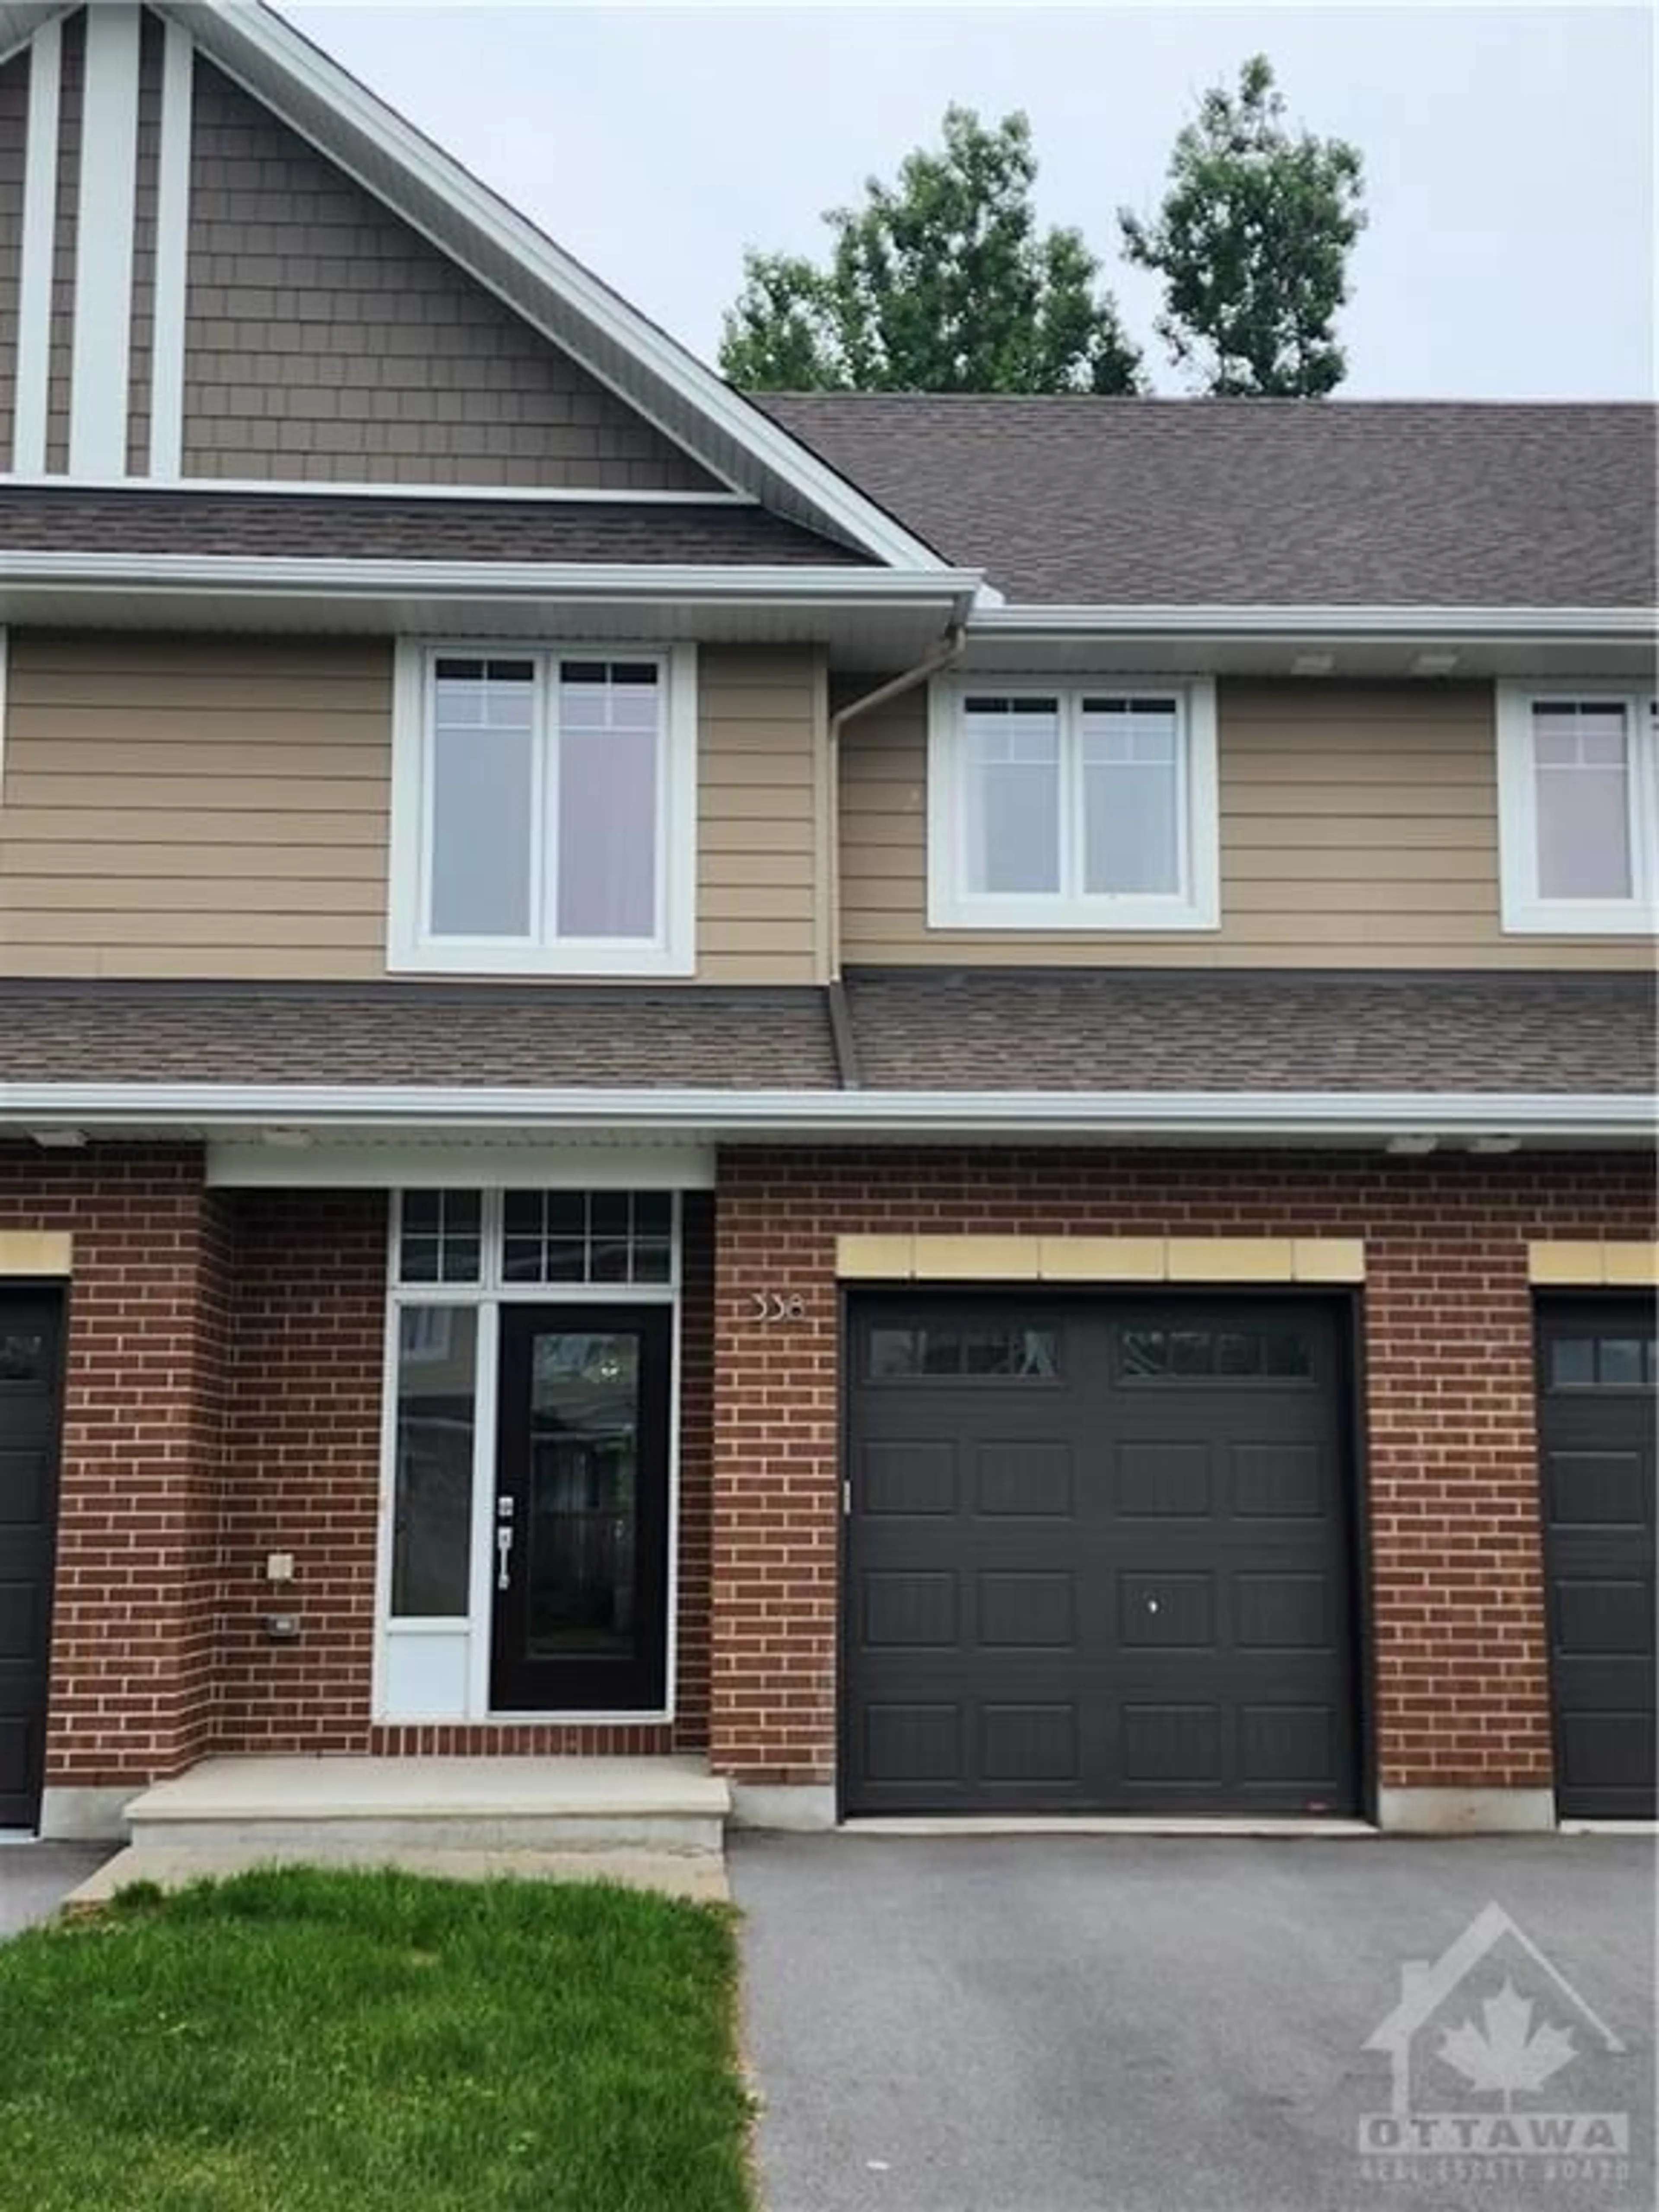 Home with brick exterior material for 338 KILSPINDIE Ridge, Ottawa Ontario K2J 6A4